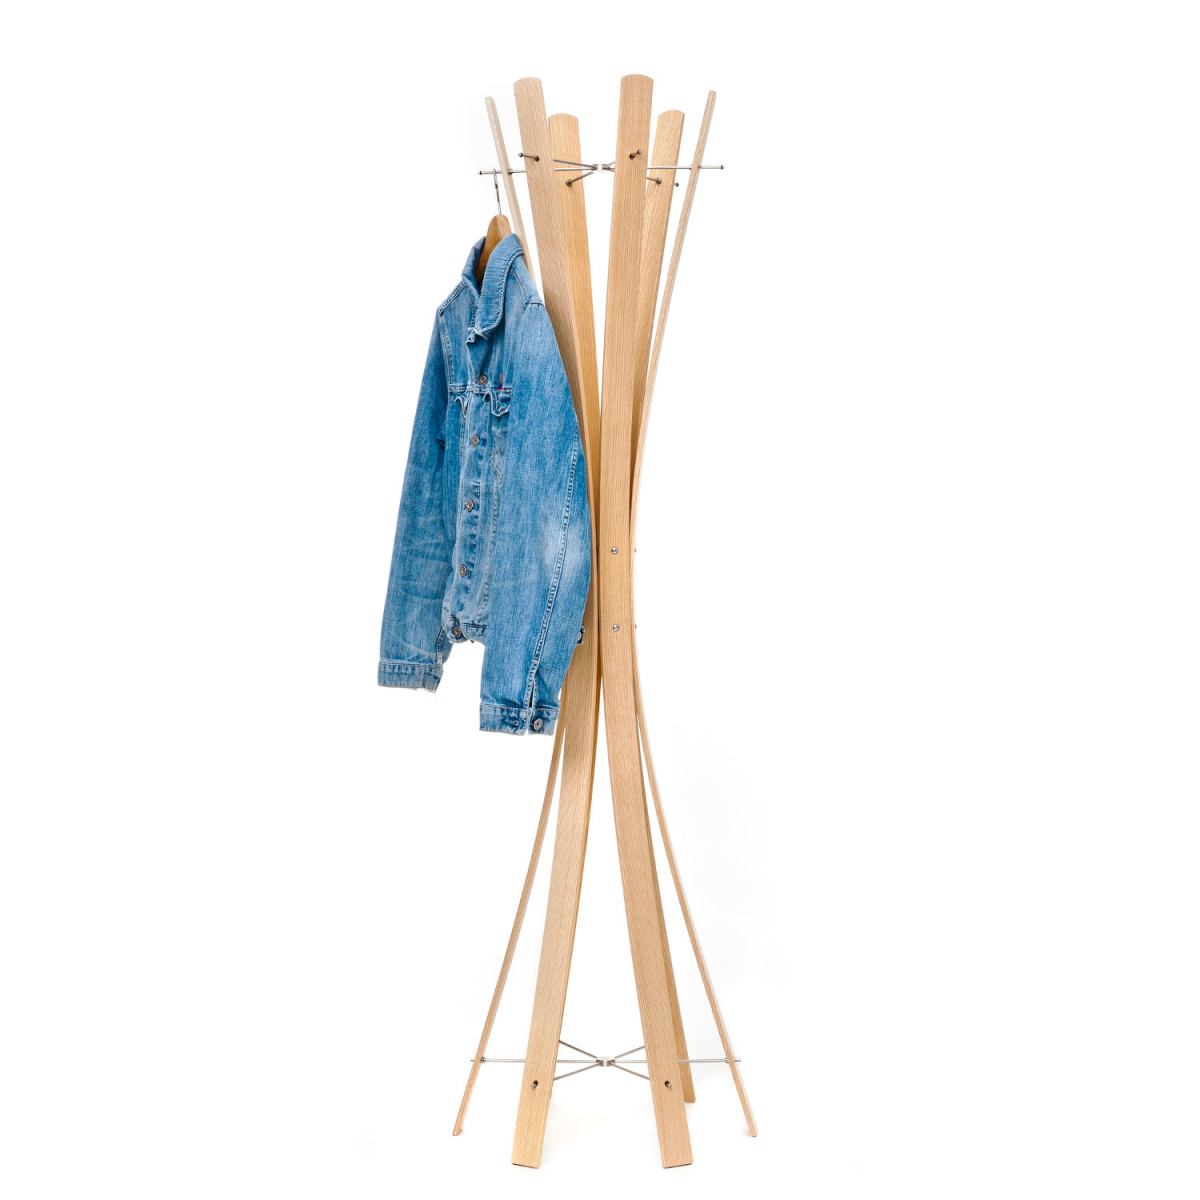 Small version: clothes rack made of solid wood